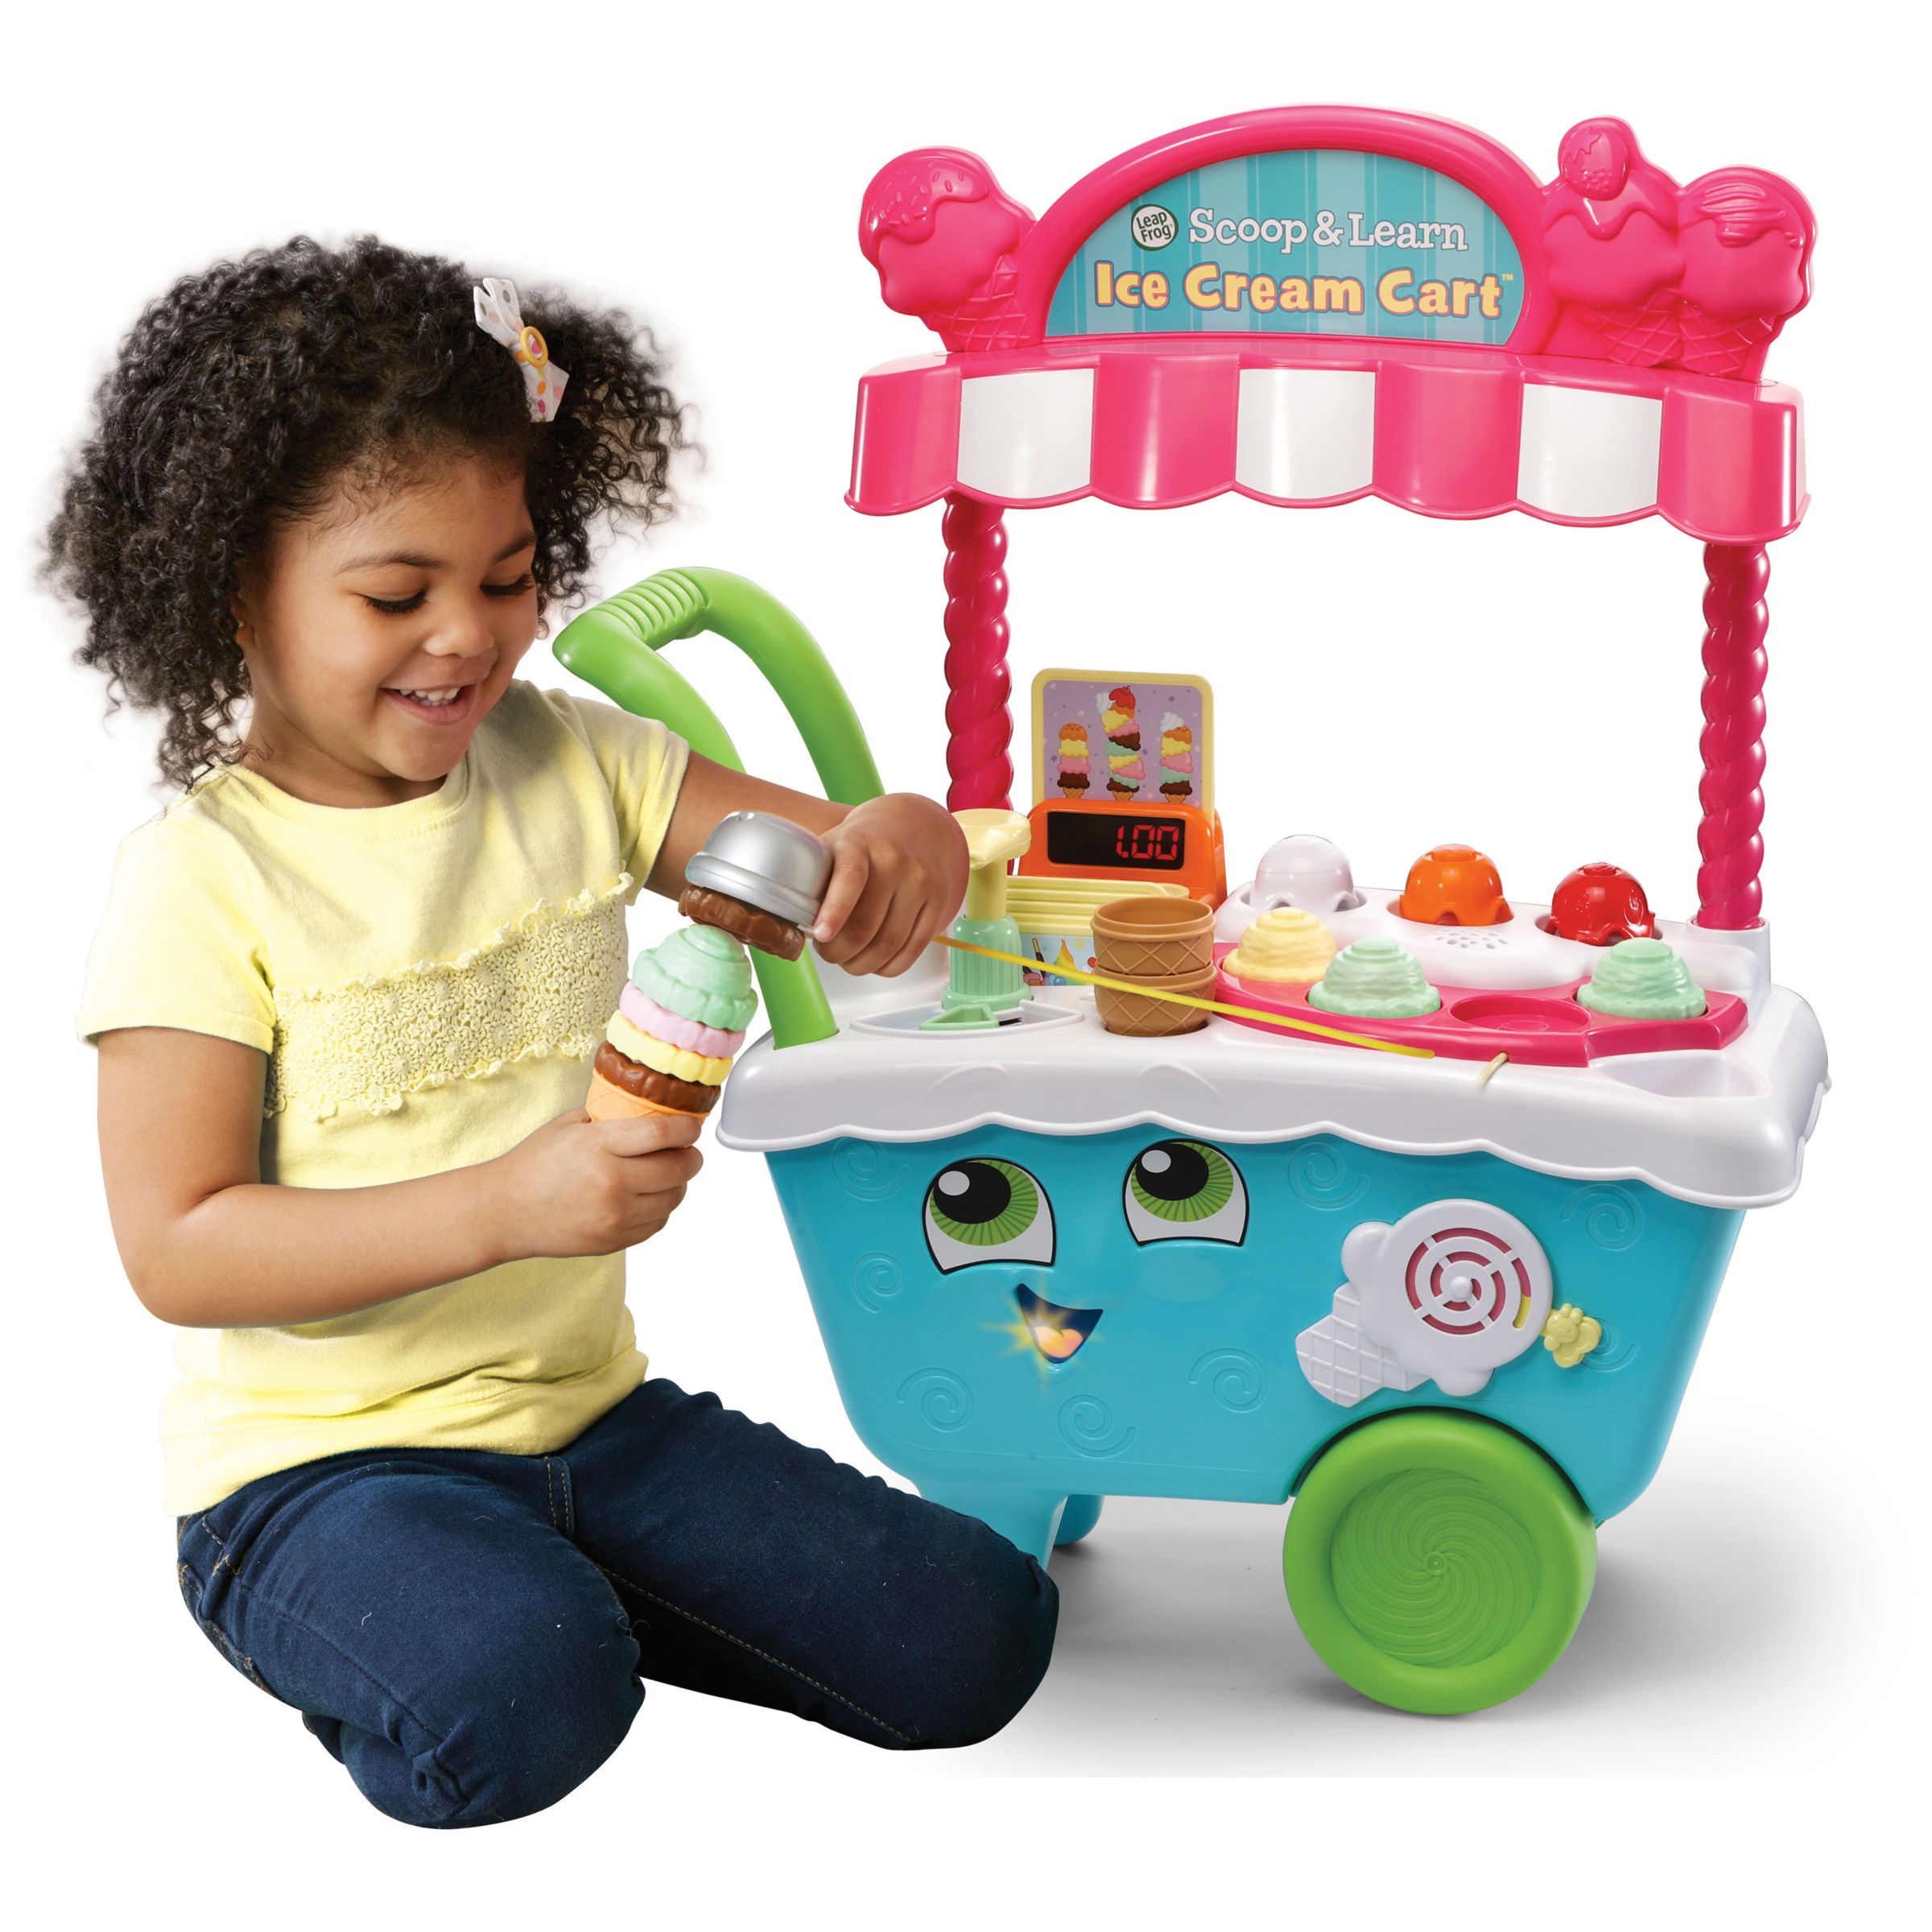 Leapfrog Scoop and Learn Ice Cream Cart, Play Kitchen Toy for Kids